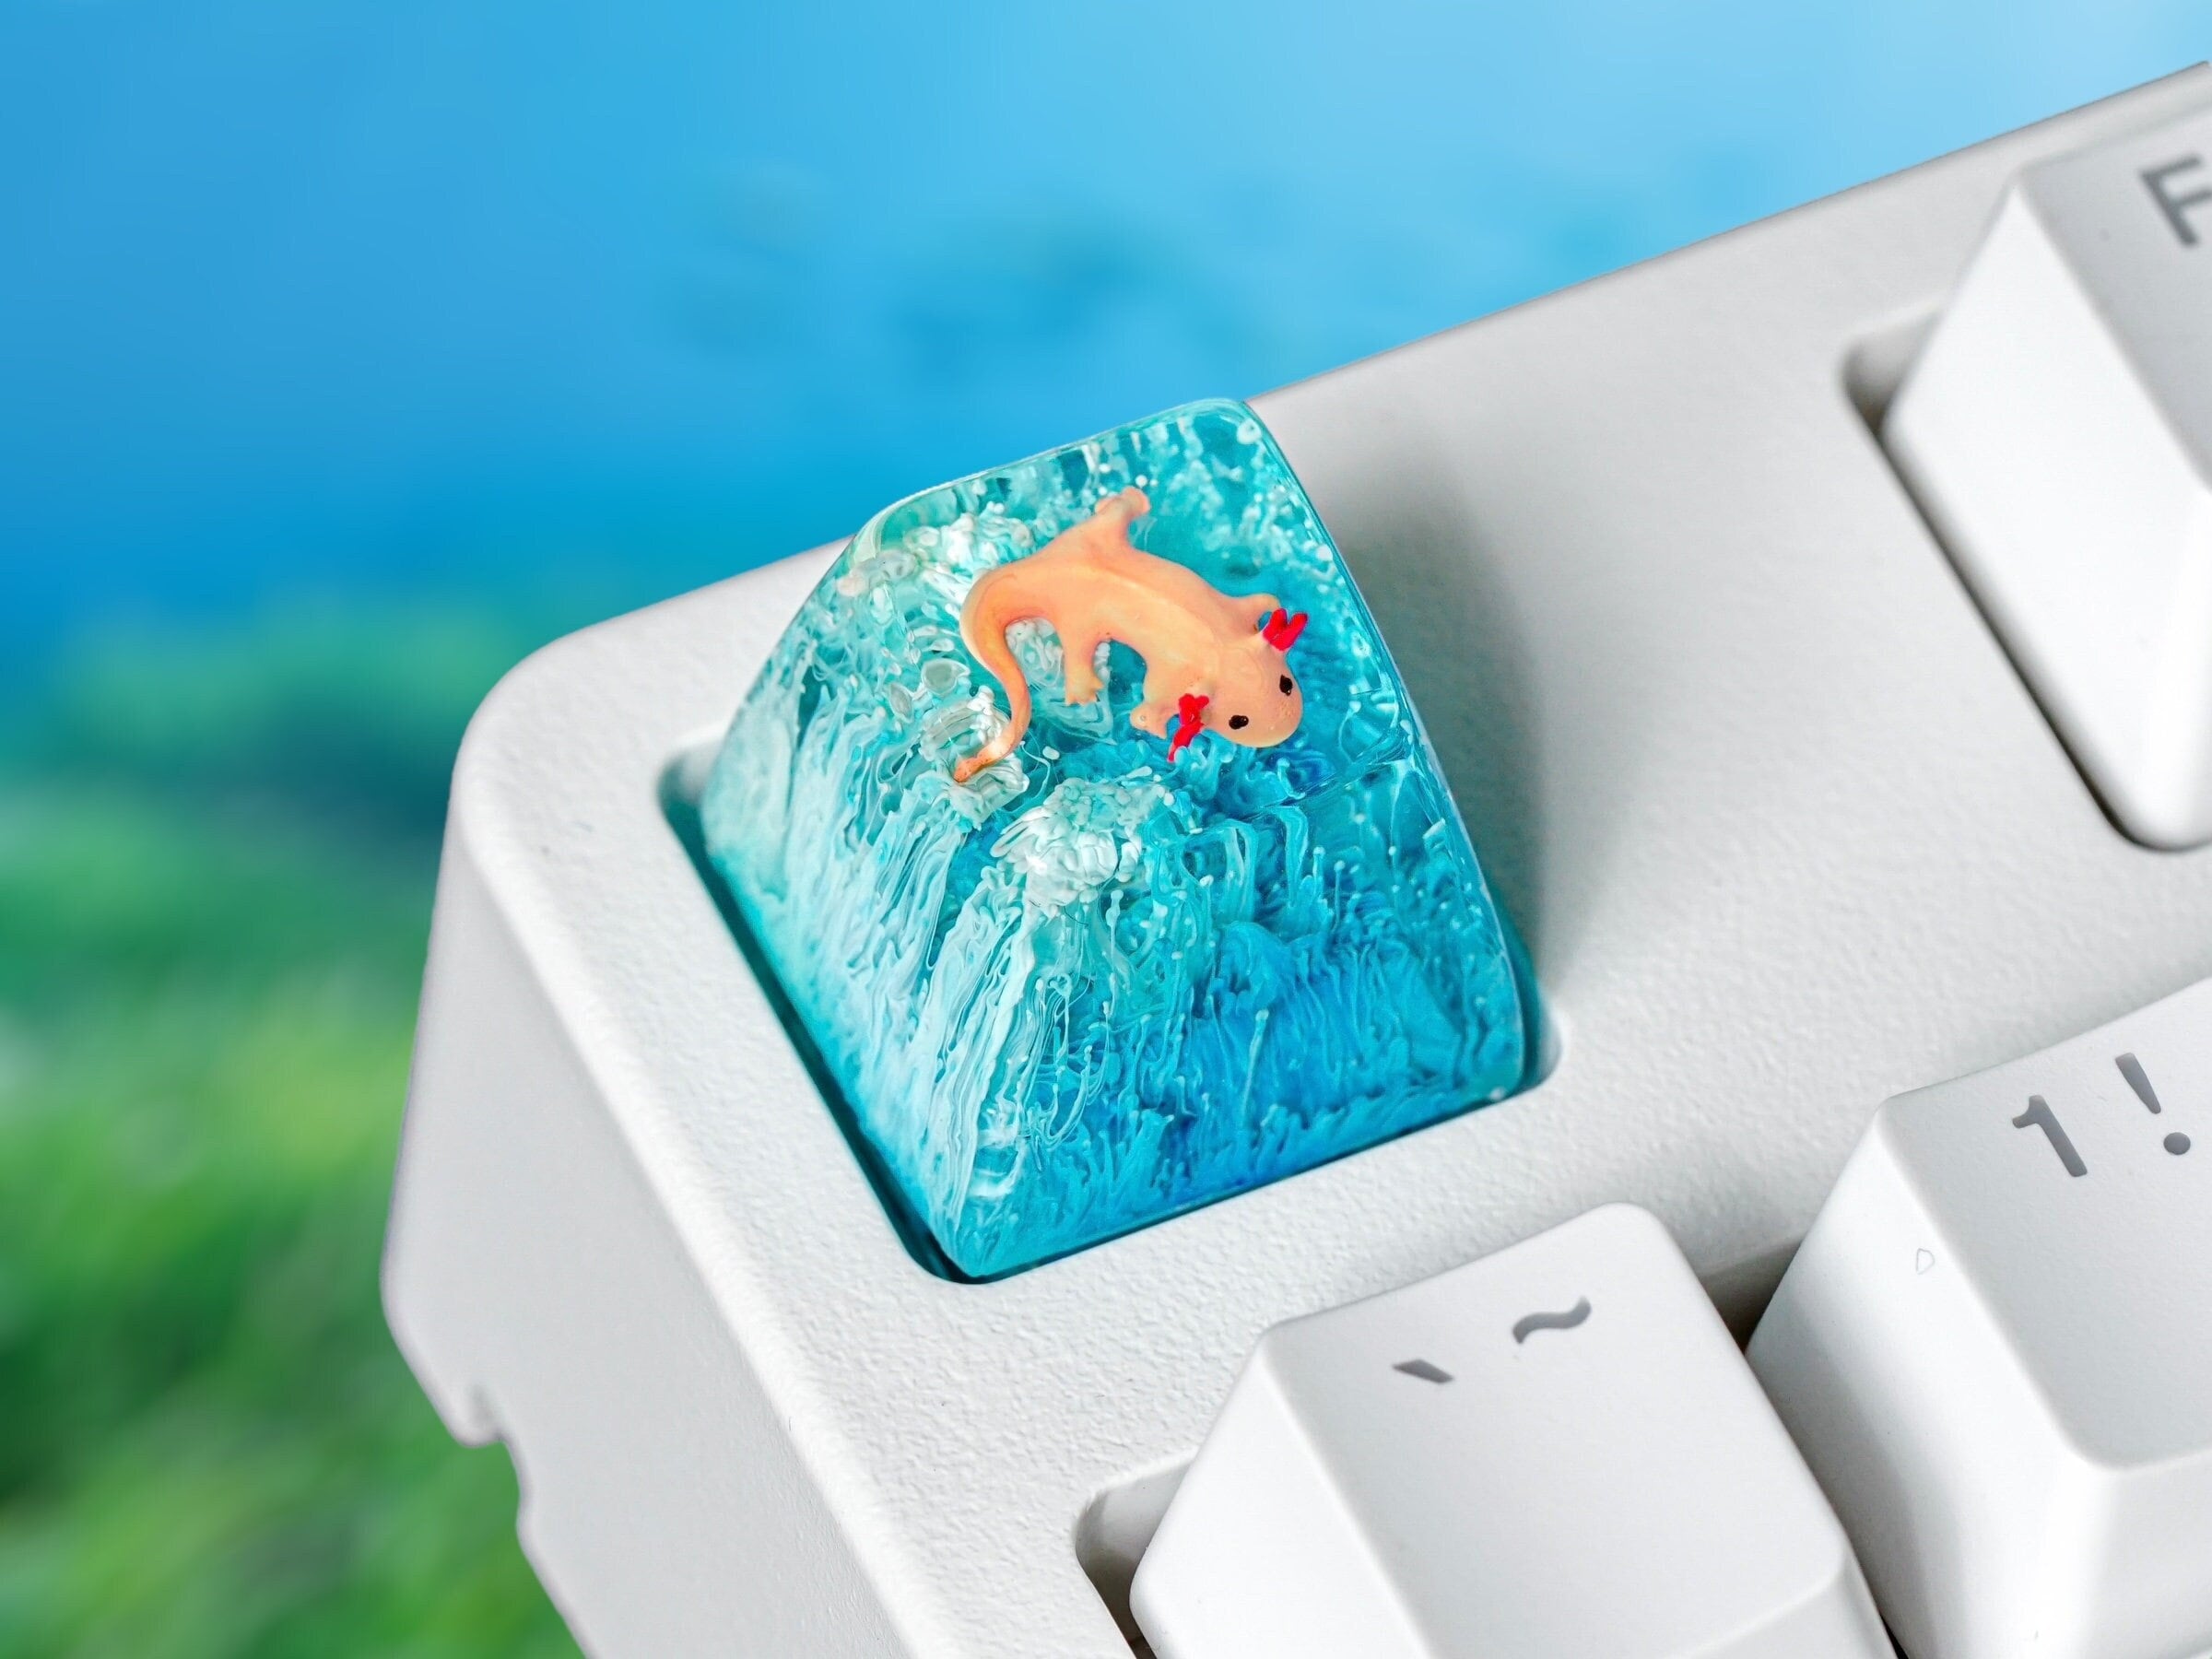 Axolotl Fish Keycap, Blue Coral, Artisan Keycap, Resin Keycap, Keycap for MX Cherry Switches Michanical Keyboard, Gift for Him